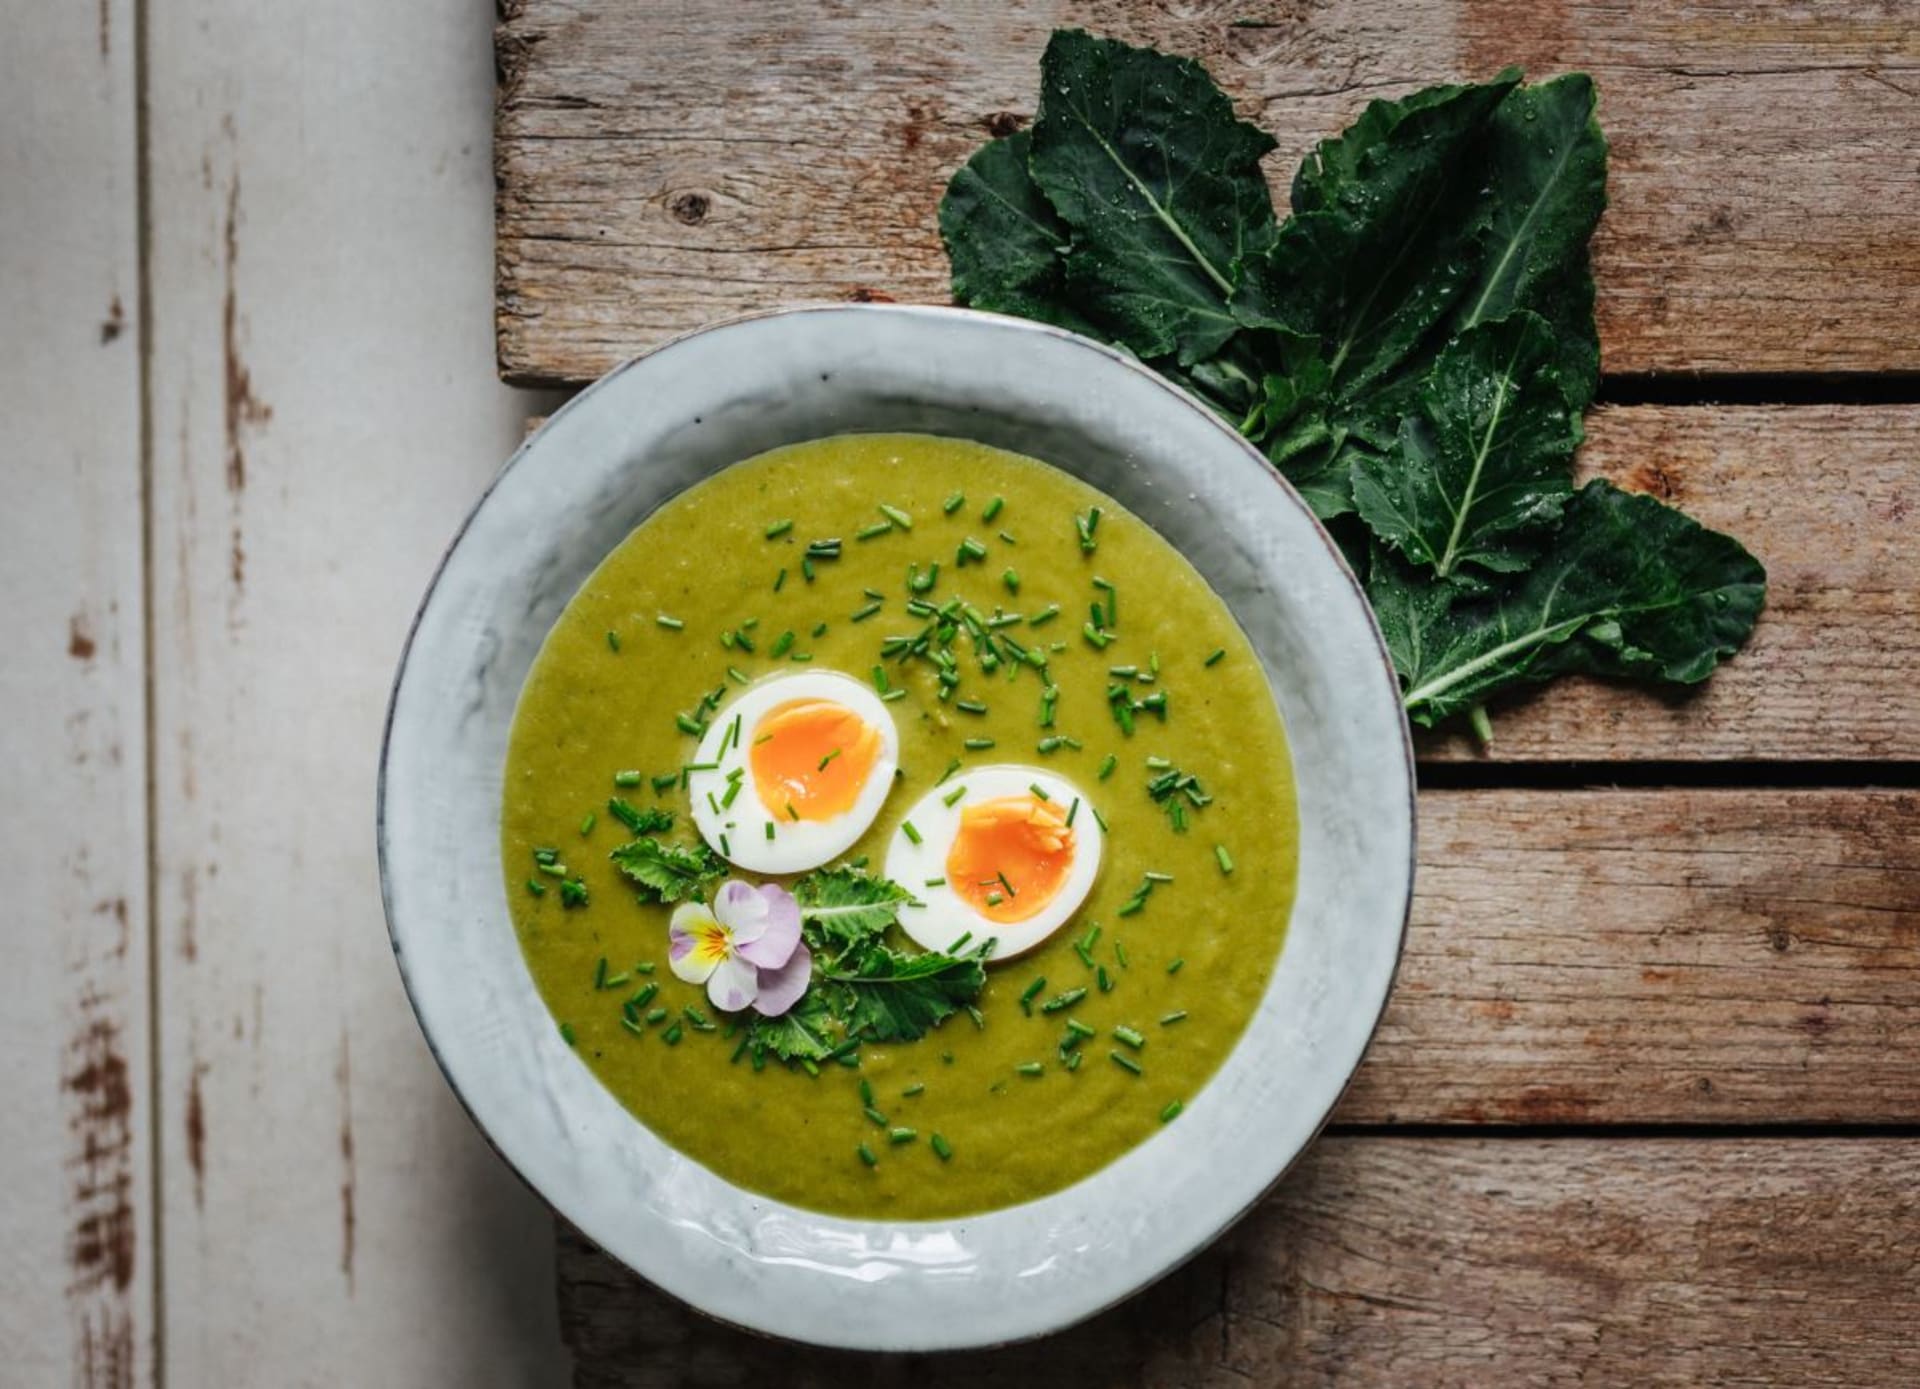 Creamy soup made from whole cabbage with an egg